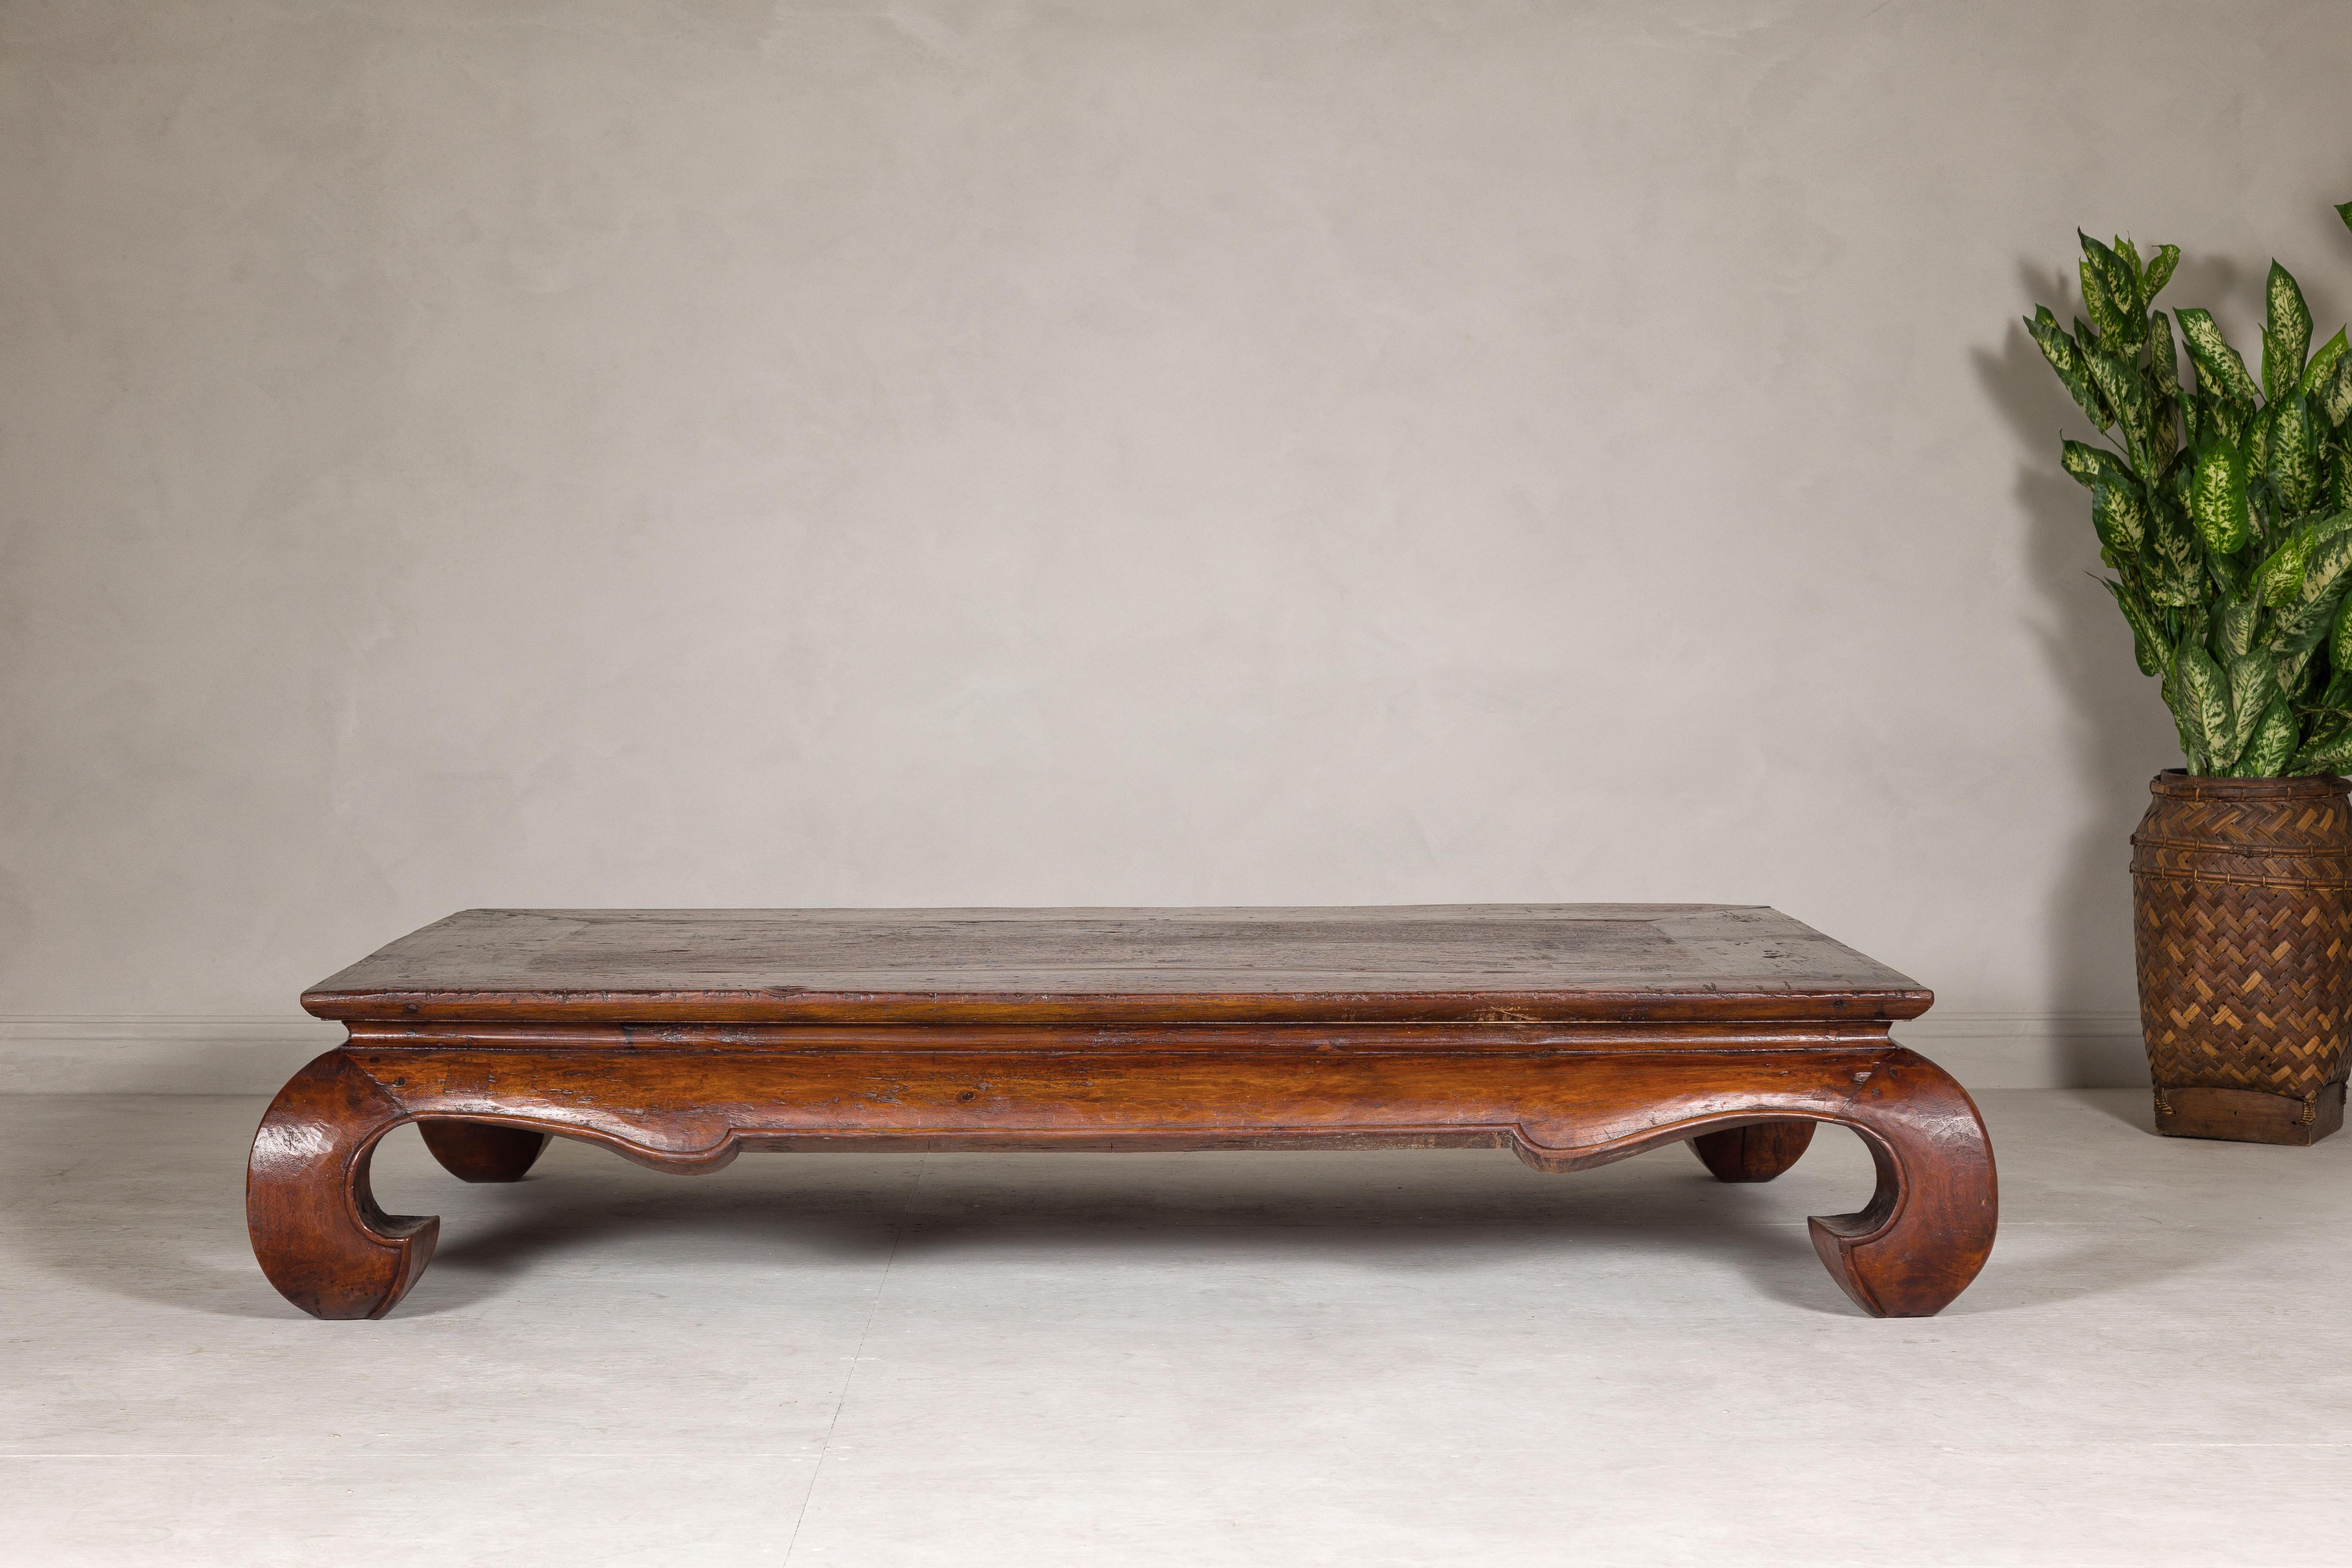 Carved Qing Dynasty 19th Century Chow Leg Kang Table with Weathered Rustic Patina For Sale